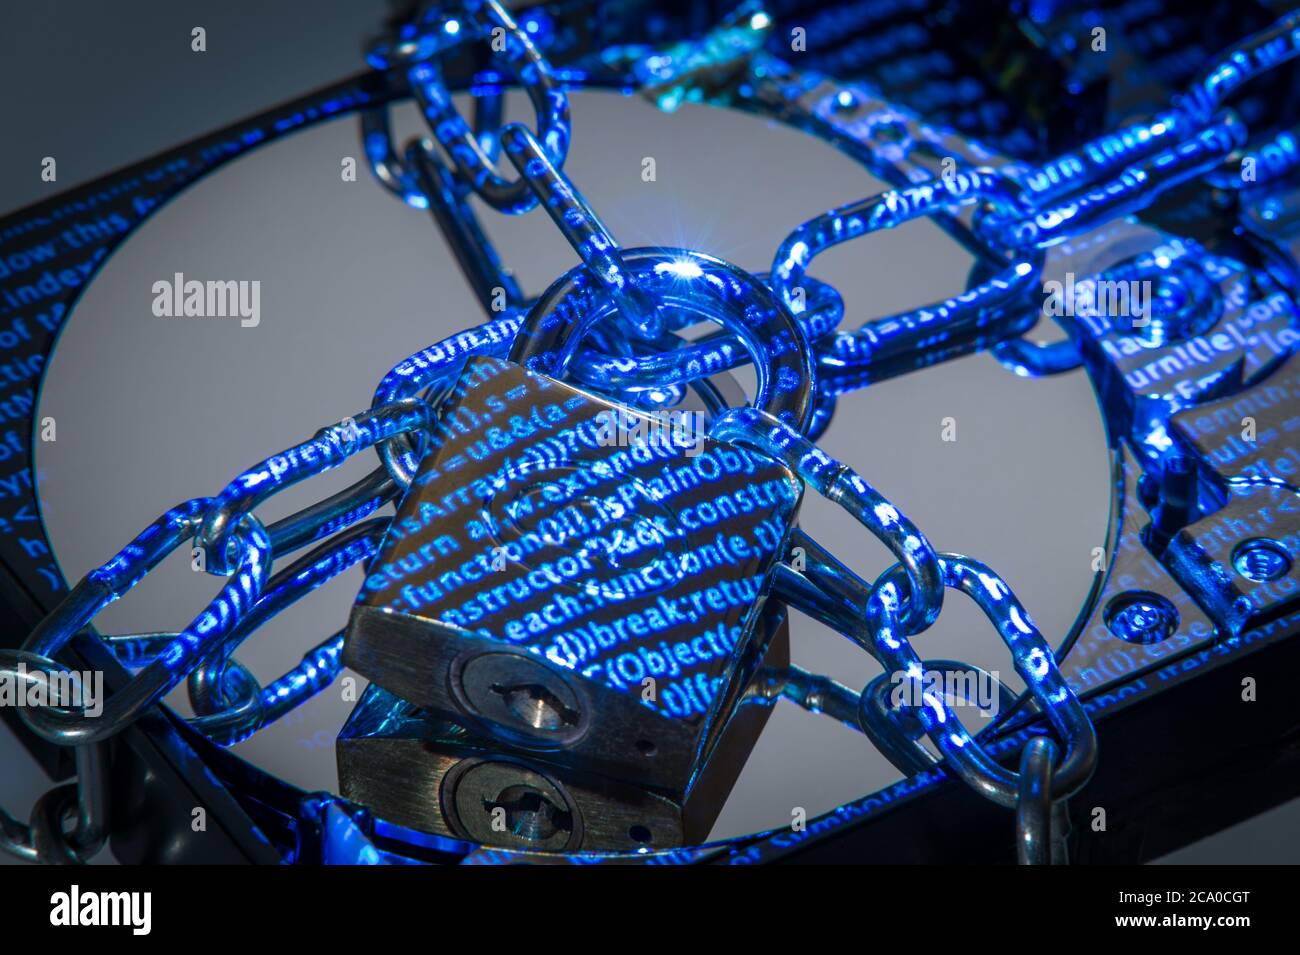 A hard disk drive (HDD) in padlocked chains with data projected on it. Stock Photo